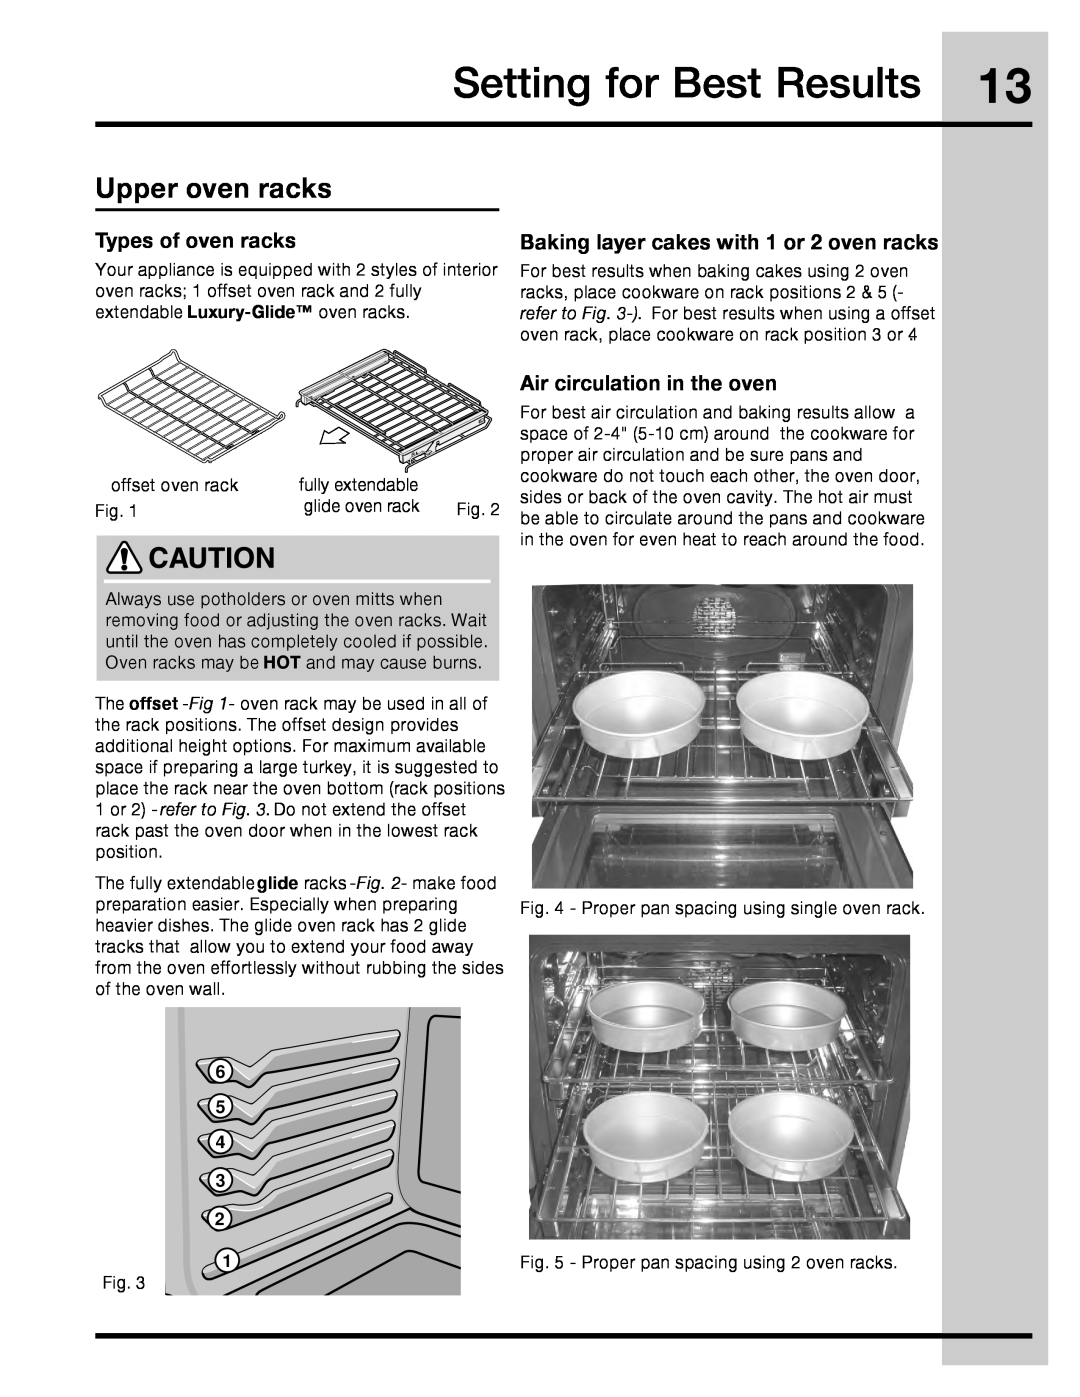 Electrolux 316471113 manual Setting for Best Results, Upper oven racks, Types of oven racks, Air circulation in the oven 